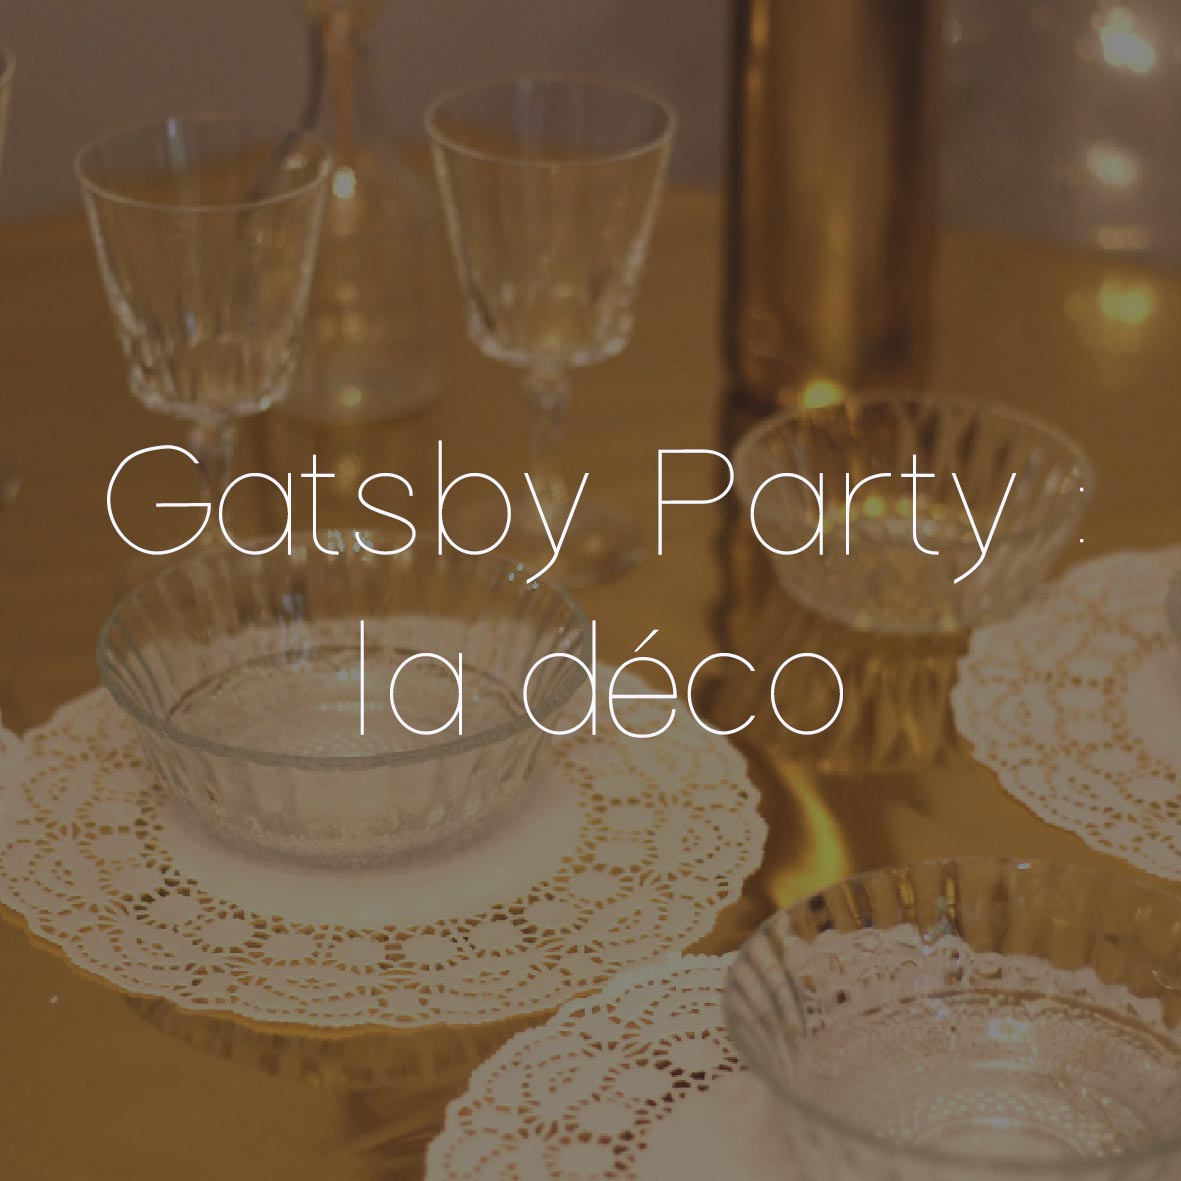 36 GATSBY PARTY 1 DECO2